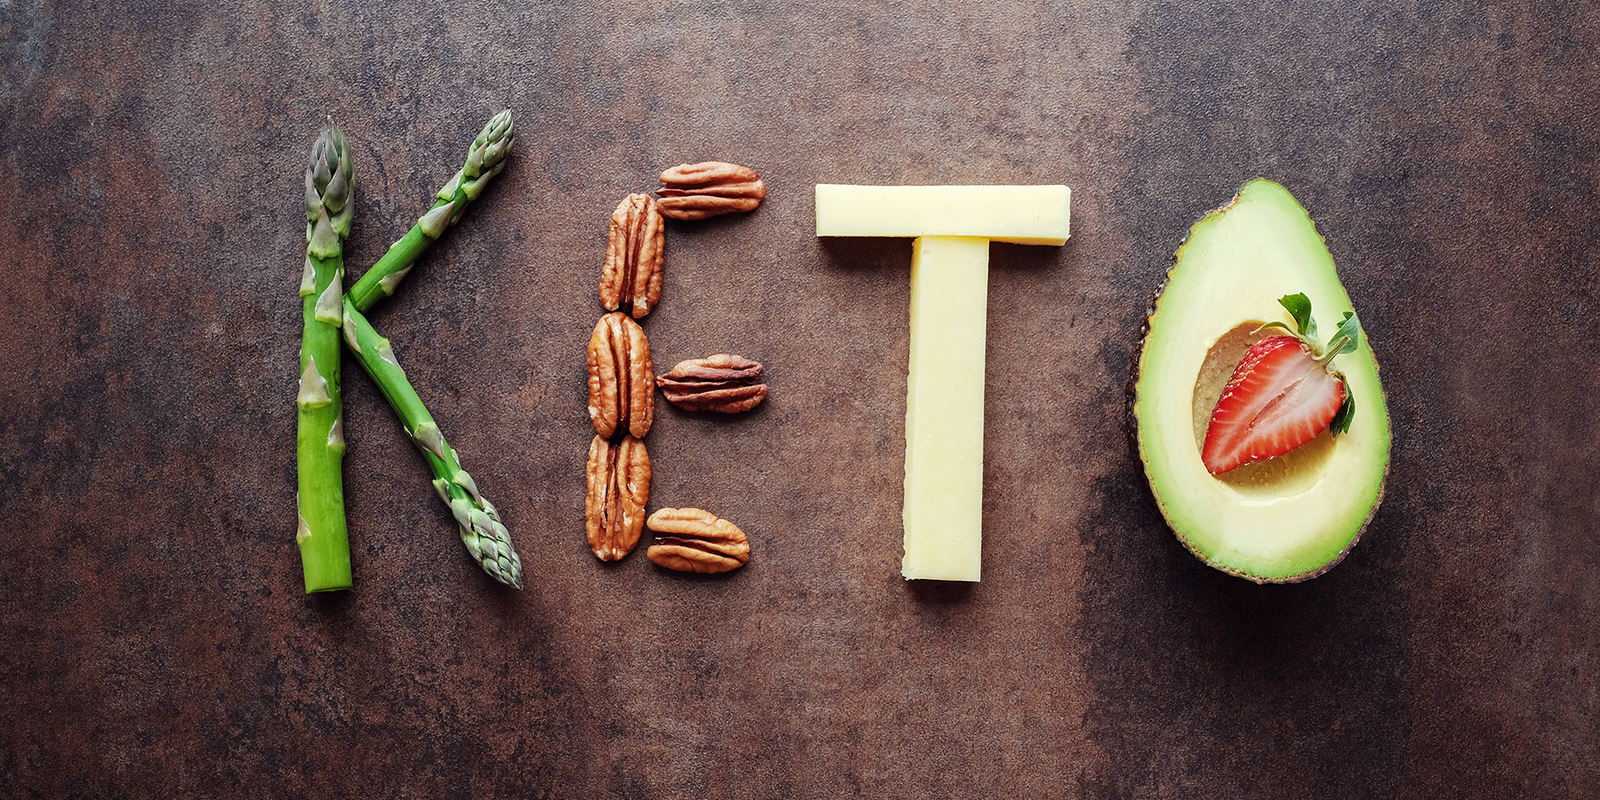 Does keto impact your testosterone levels? Everything you need to know